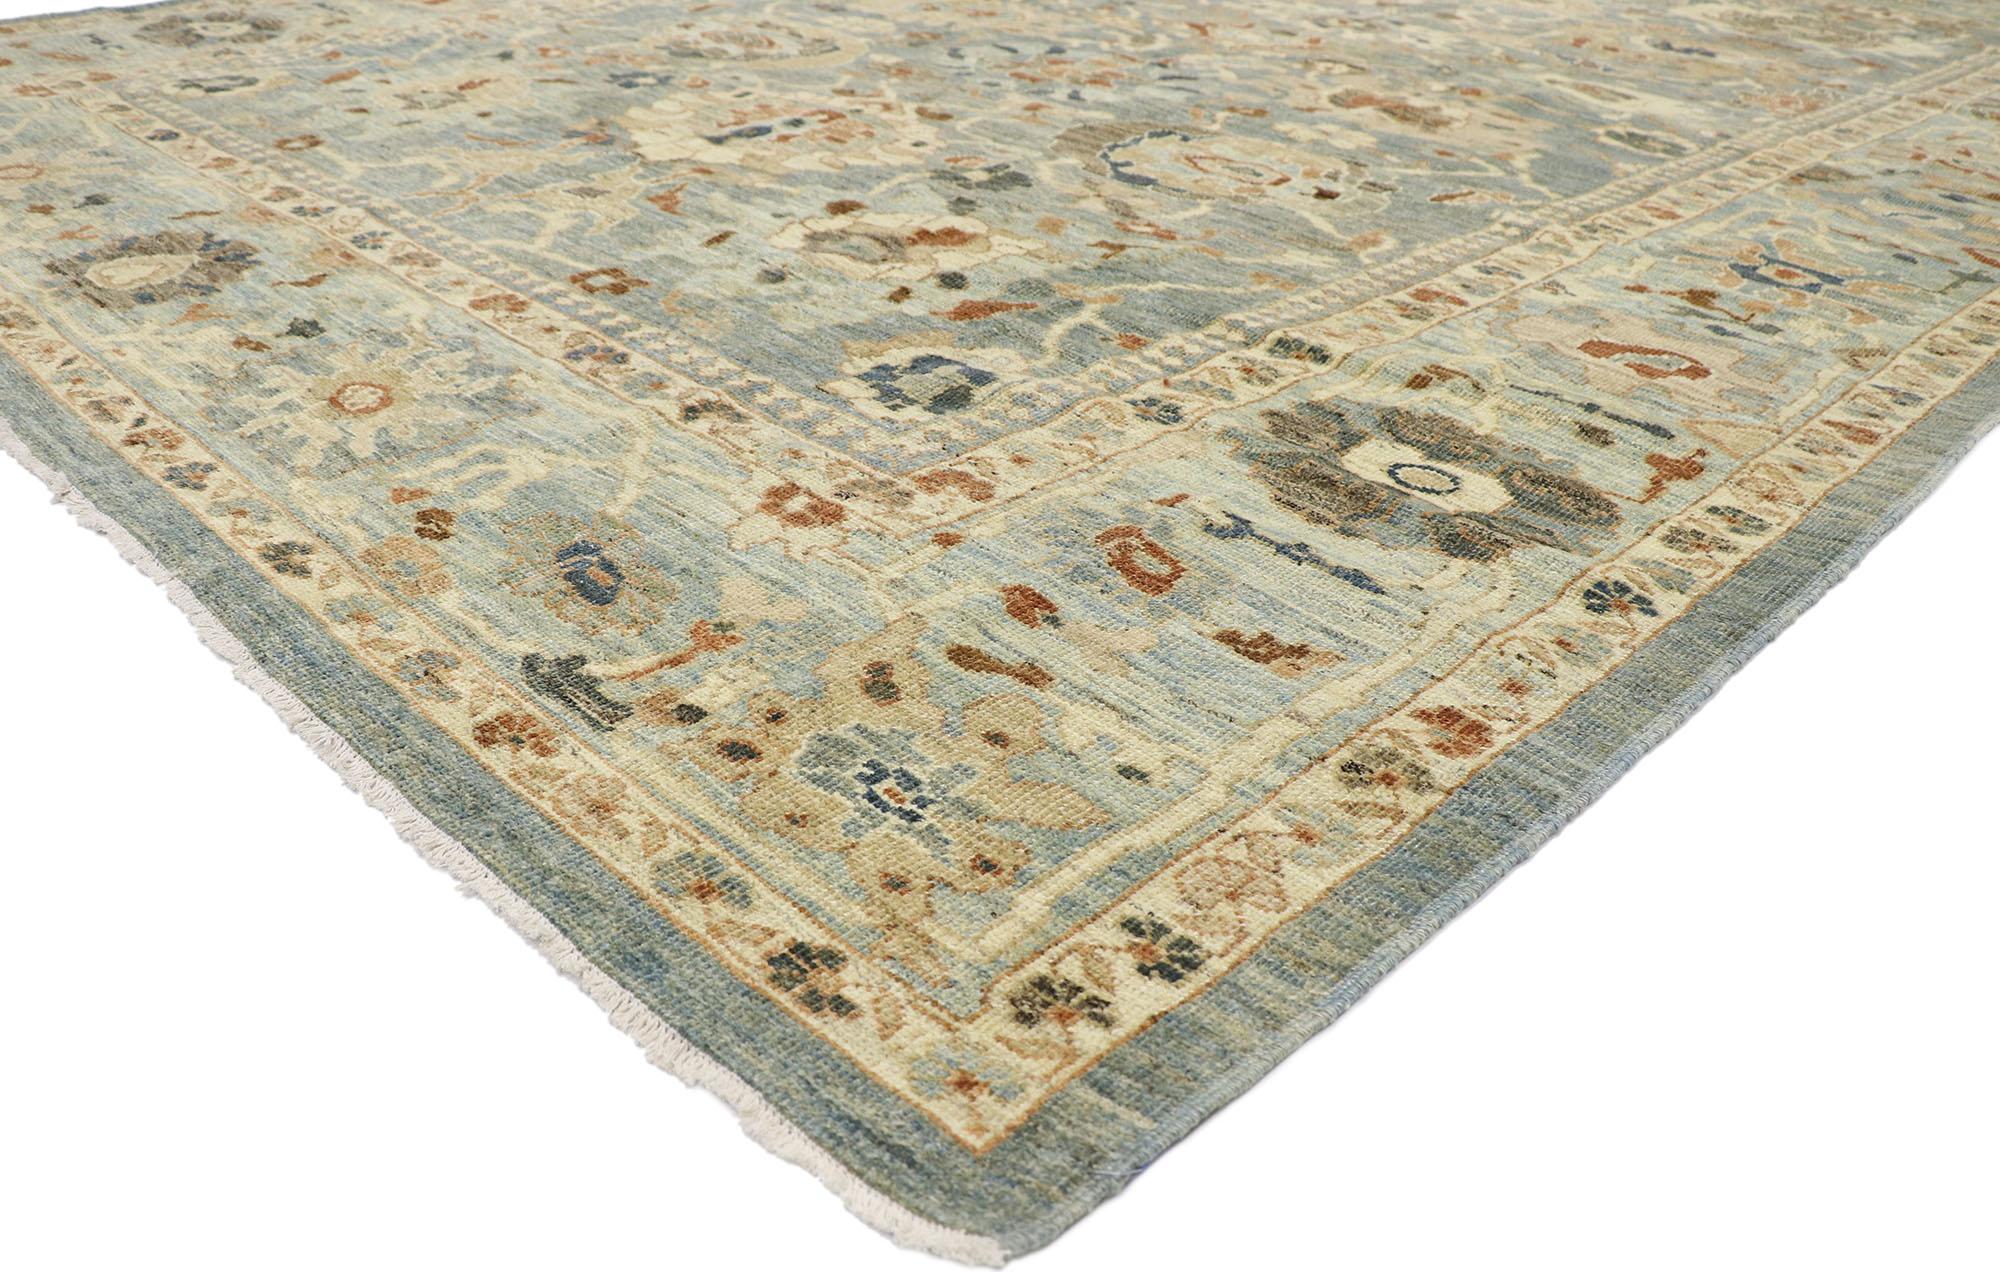 60899, new Contemporary Persian Sultanabad rug with Transitional Modern style. This hand-knotted wool contemporary Persian Sultanabad rug features an all-over botanical lattice pattern spread across an abrashed blue-grey field. An array of botanical